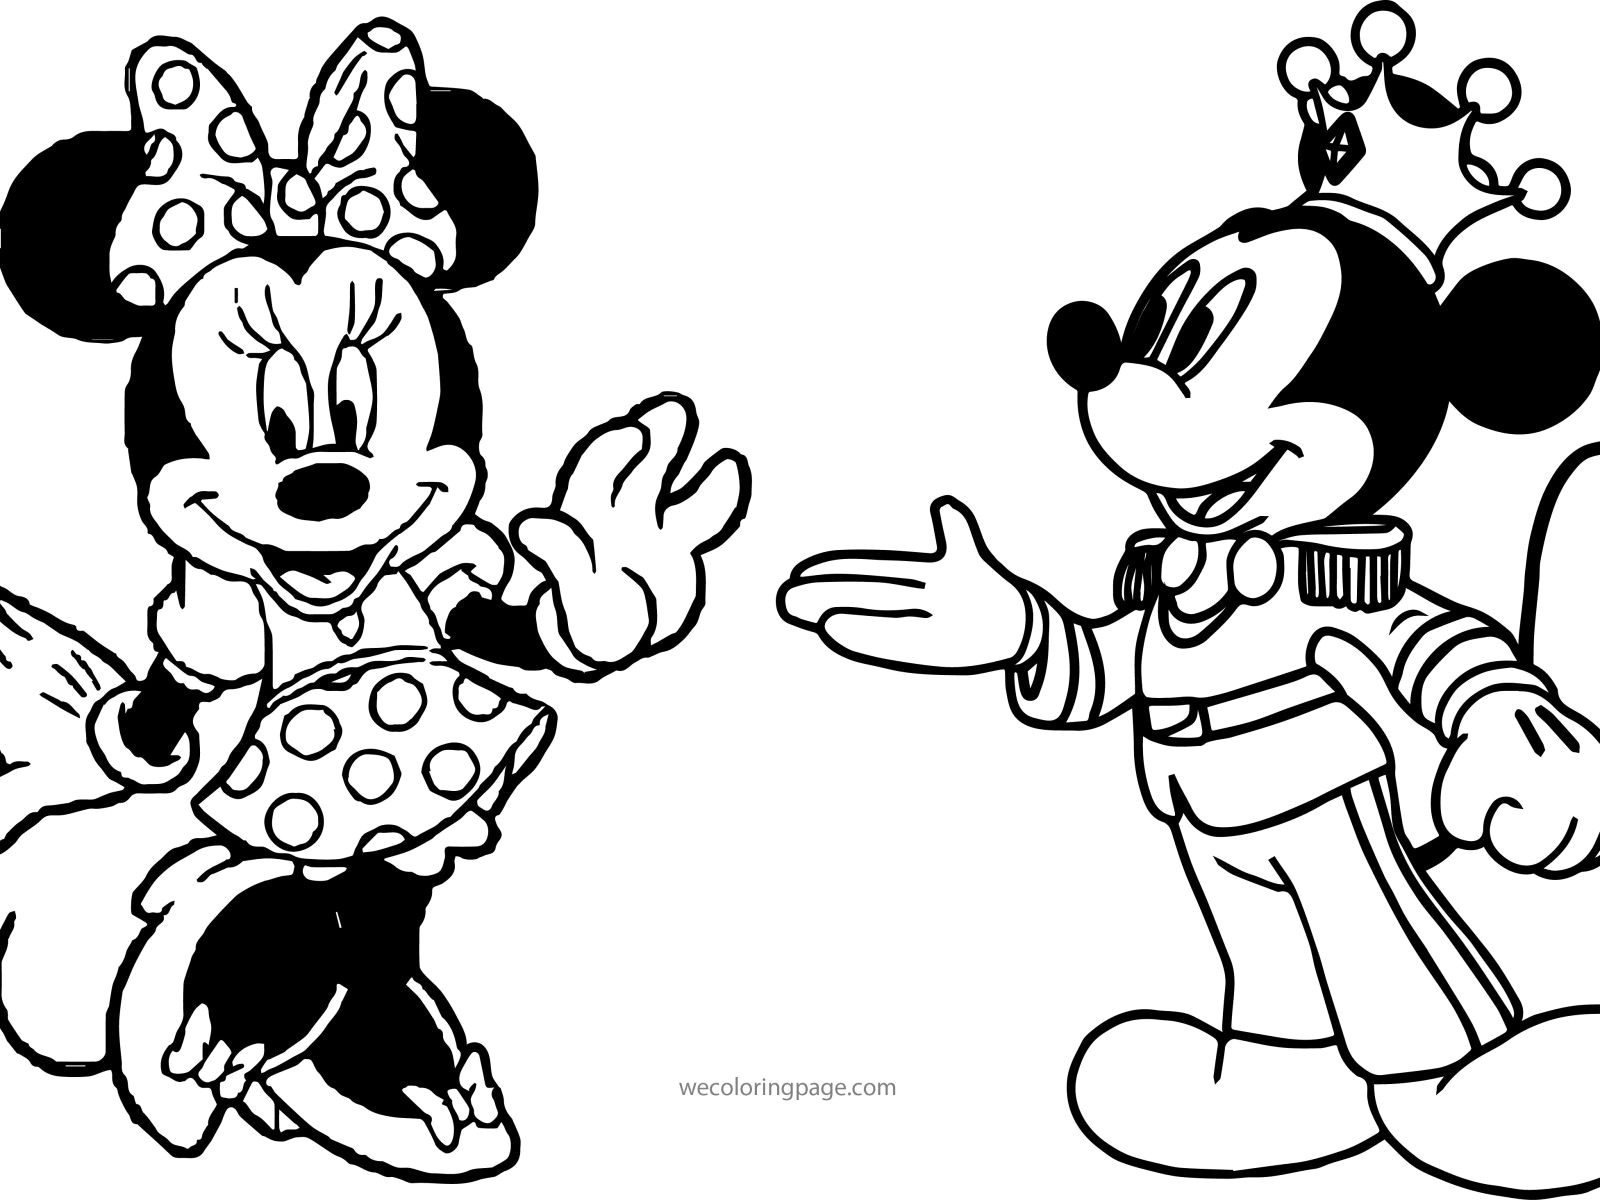 Mickey Mouse And Minnie Coloring Pages Coloring Ideas Mickey Mouse Coloring Pages To Print New Minnie